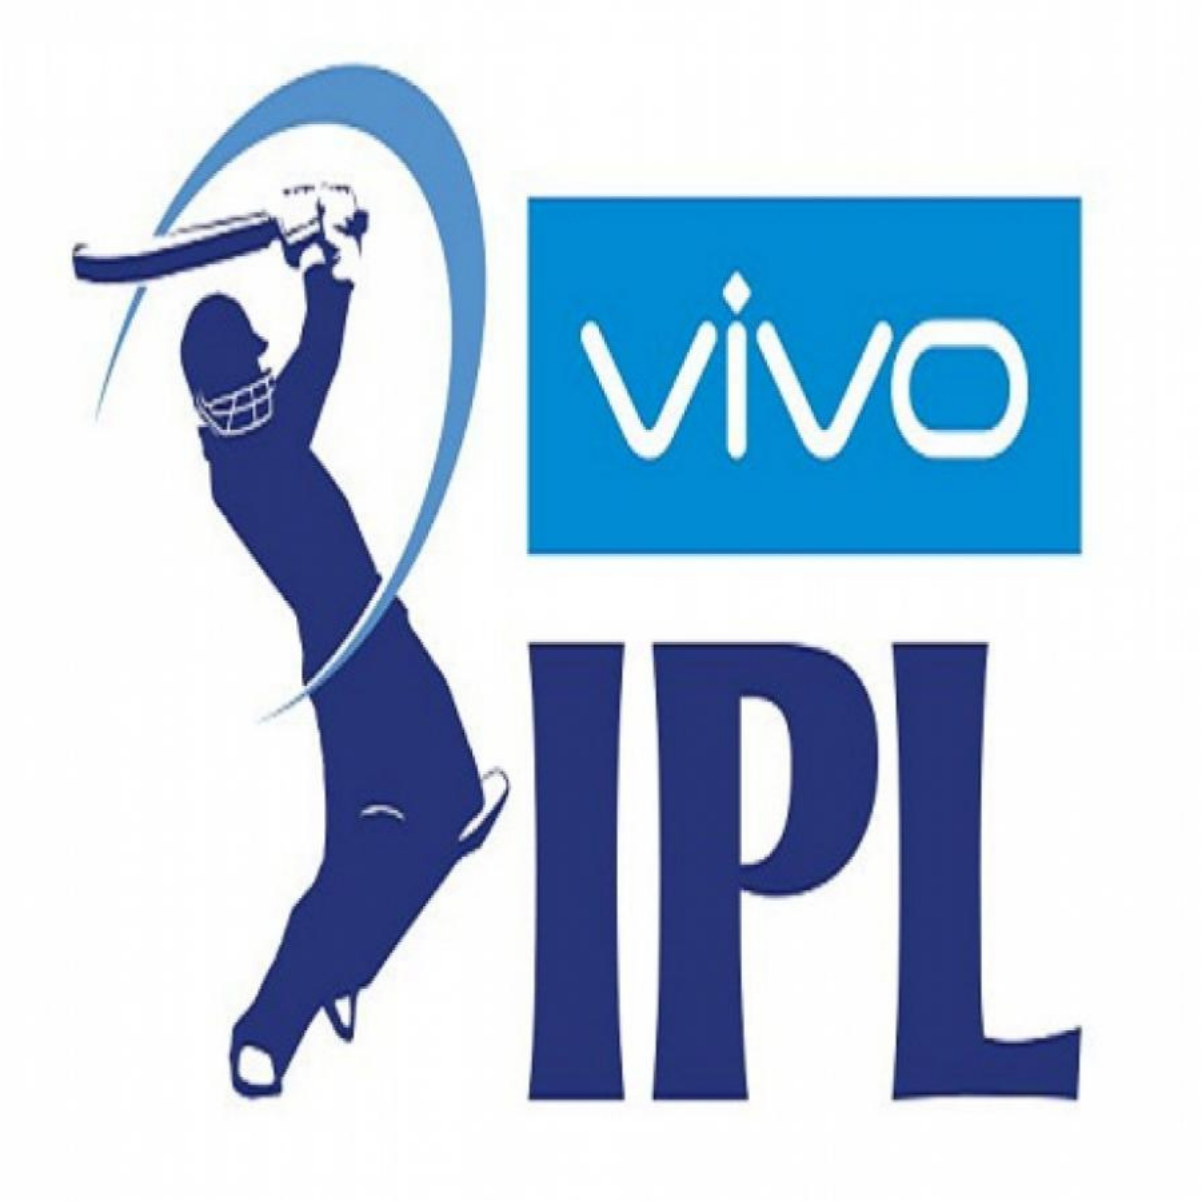 How to Watch IPL Live in Canada for Free